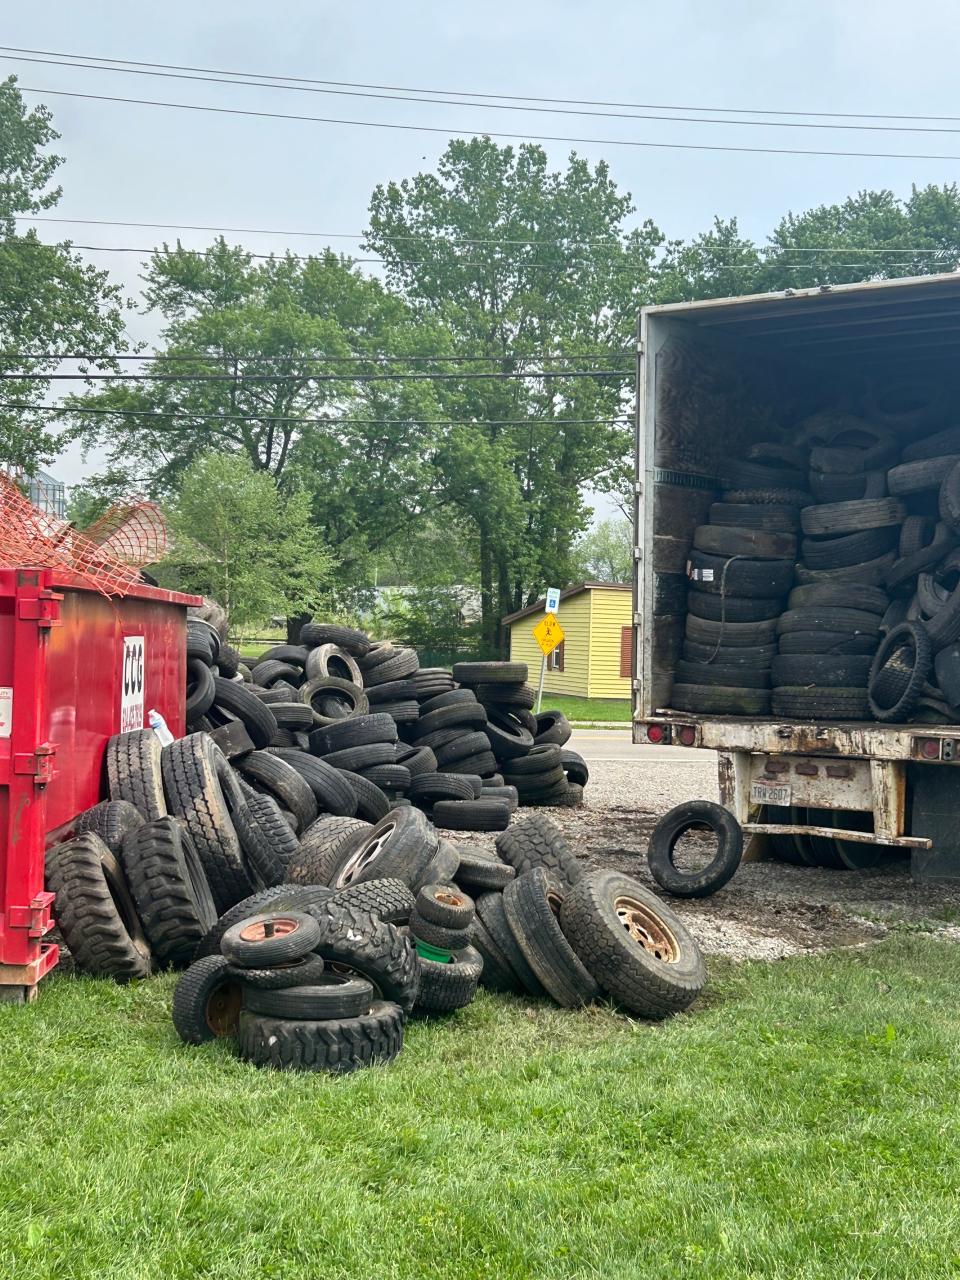 The Village of Thurston teamed up with the Fairfield County Health Department to collect tires recently. It was estimated that more than 1,600 tires were collected.